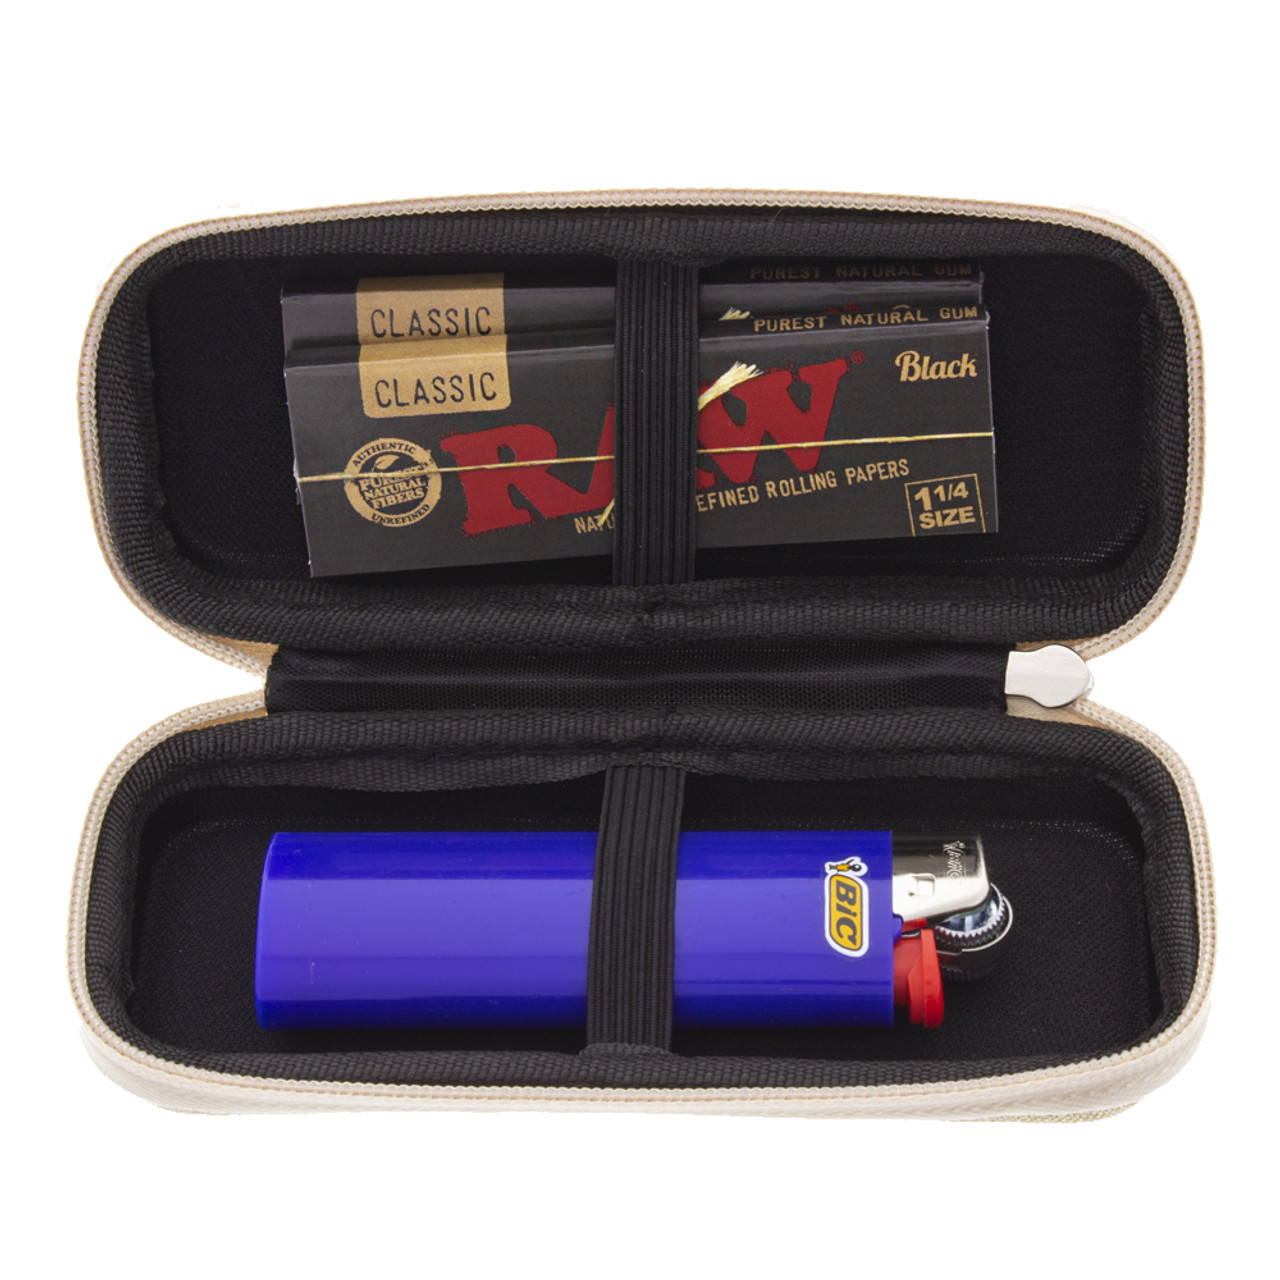  Smell Proof Travel Case For King Size Cones or Joints and Bic -  Water Proof and Super Durable : Health & Household